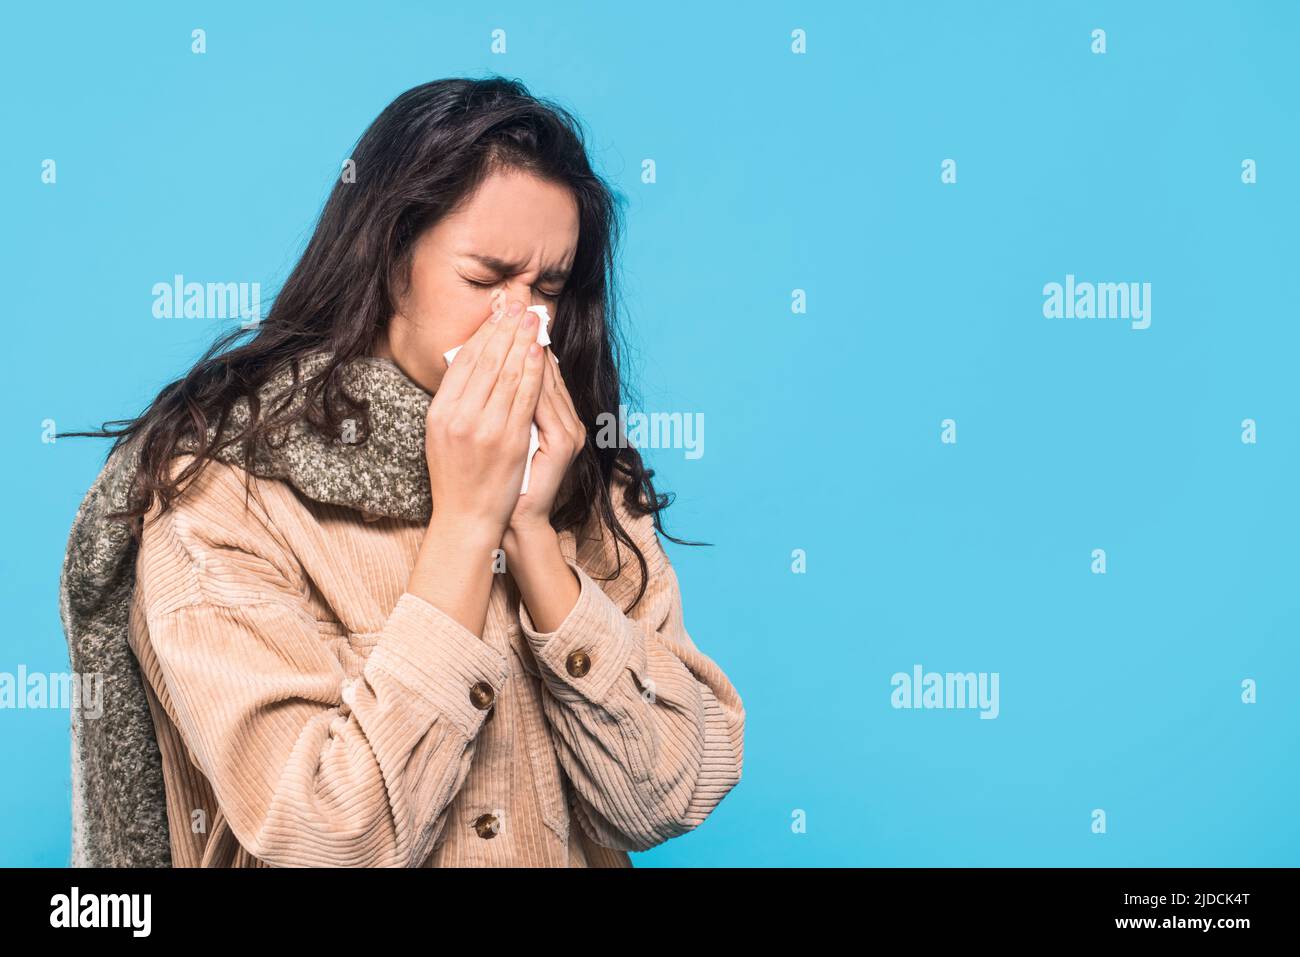 Sad millennial caucasian woman brunette patient with scarf blowing her nose, isolated on blue background Stock Photo